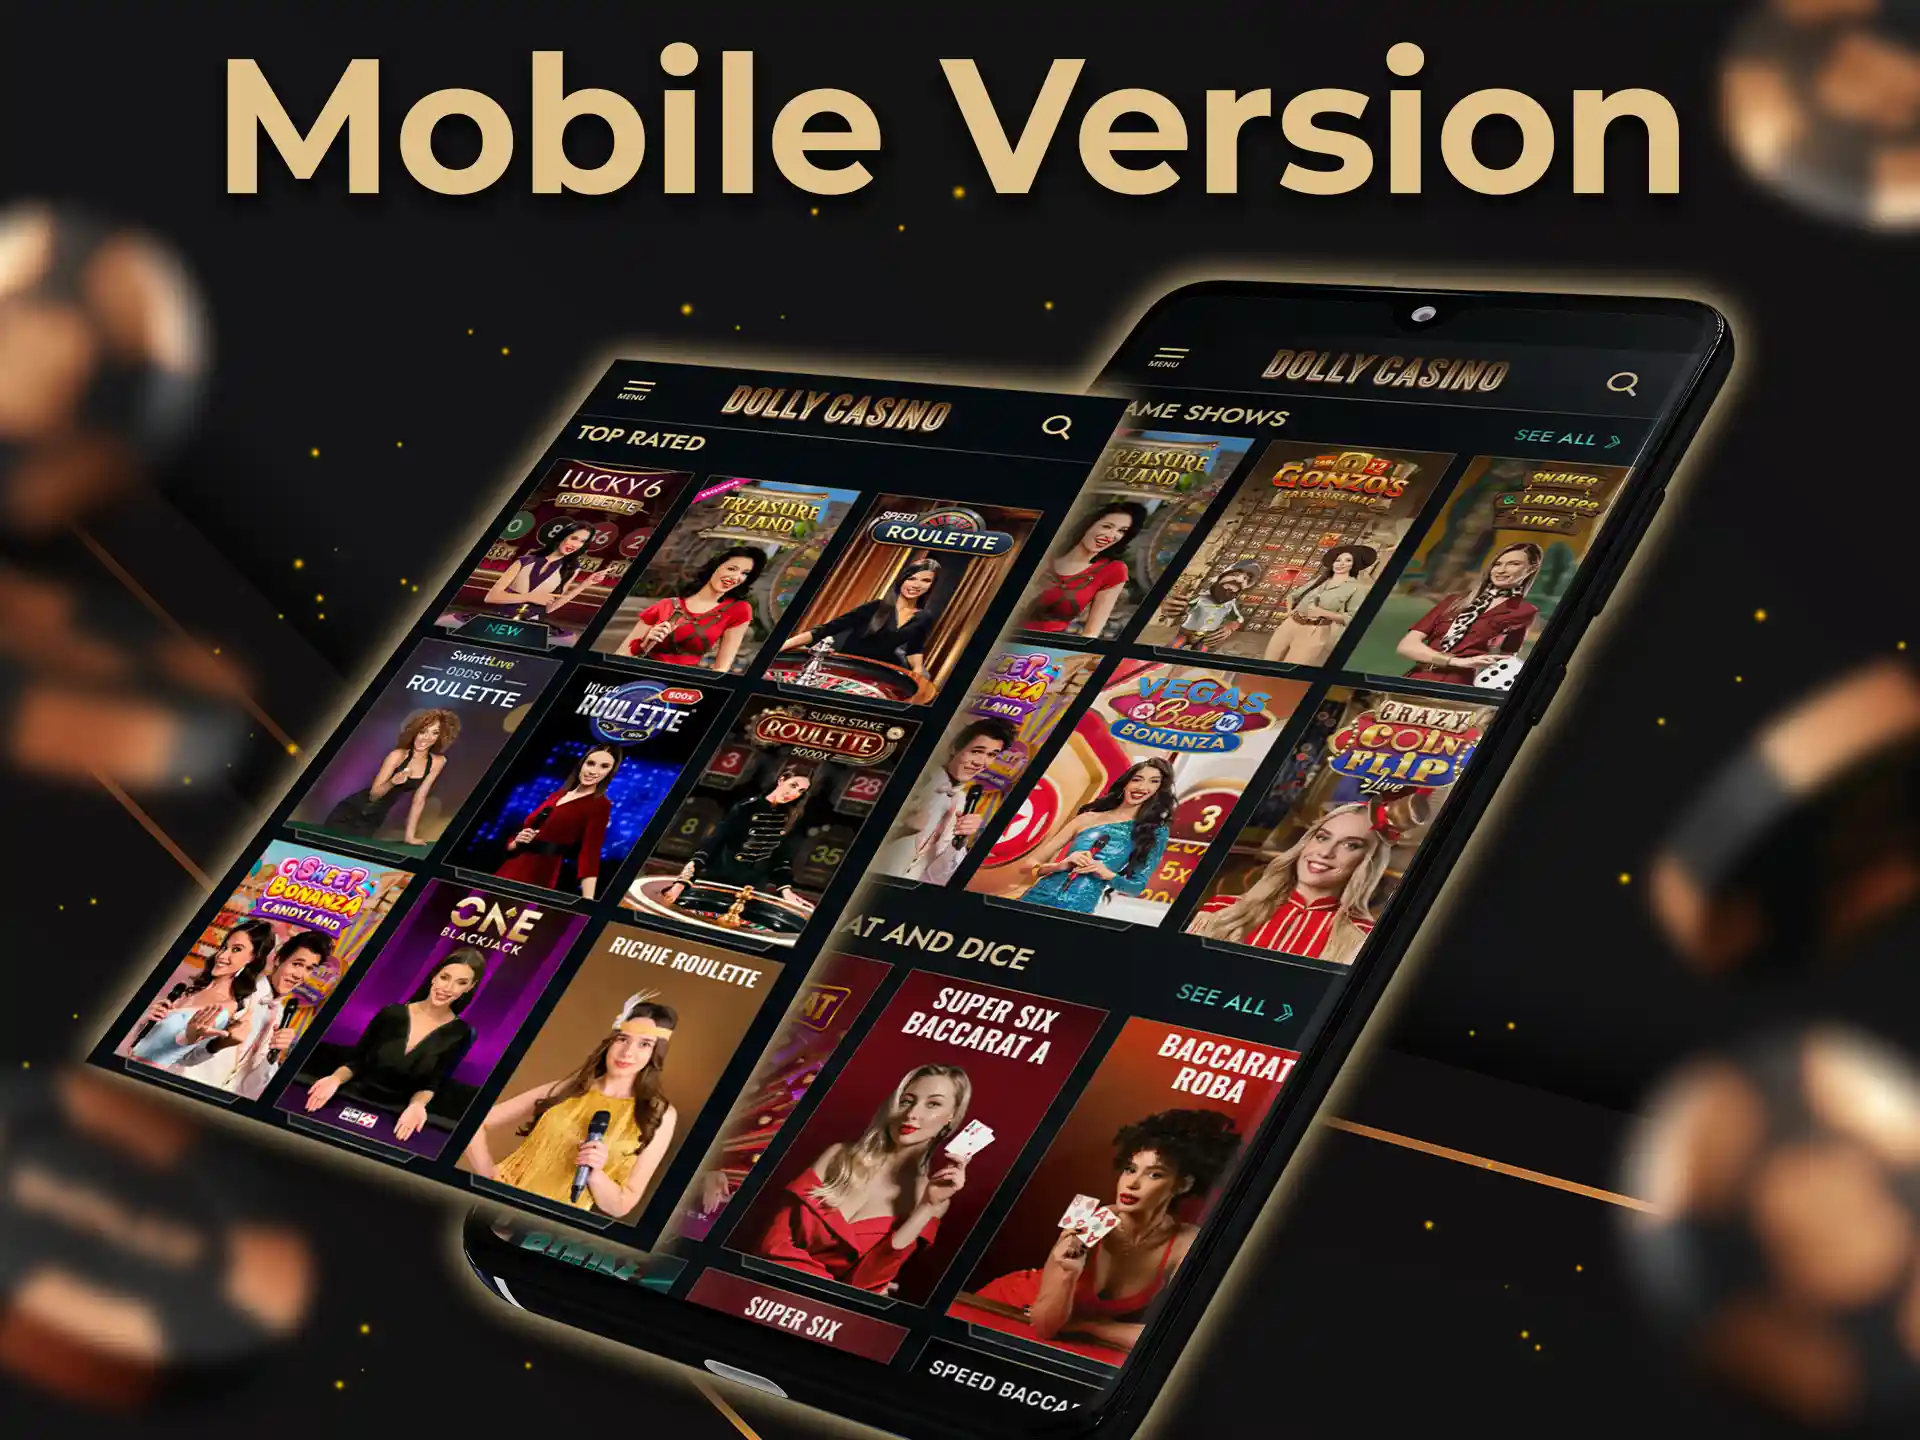 Dolly's mobile version works from any browser and includes almost all of the app's features.